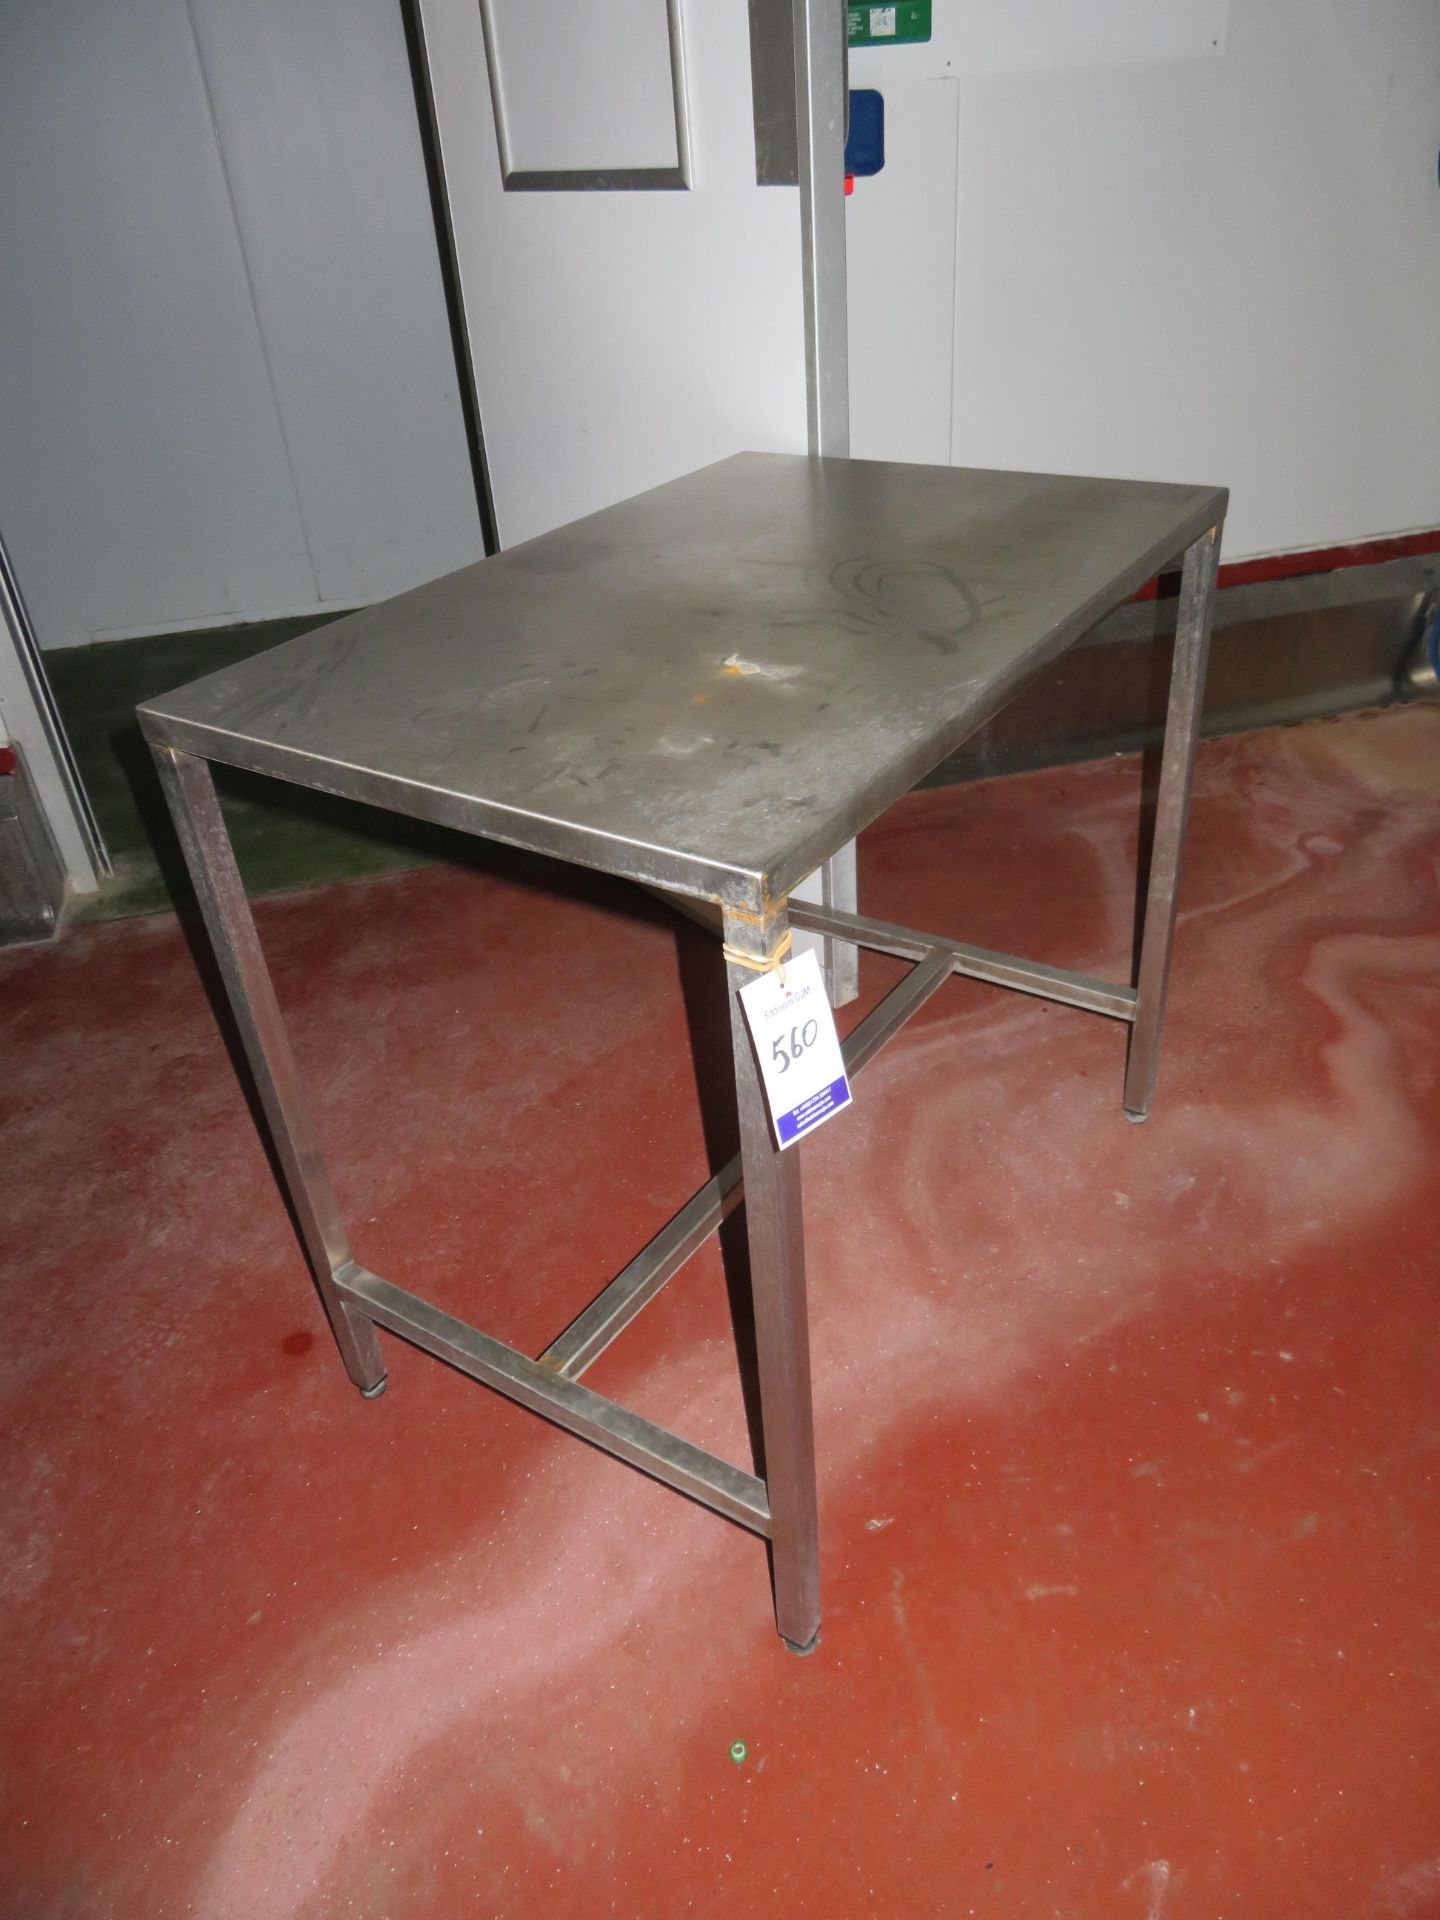 3 x SS preparation benches, 1 x SS mobile trolley - Image 2 of 5